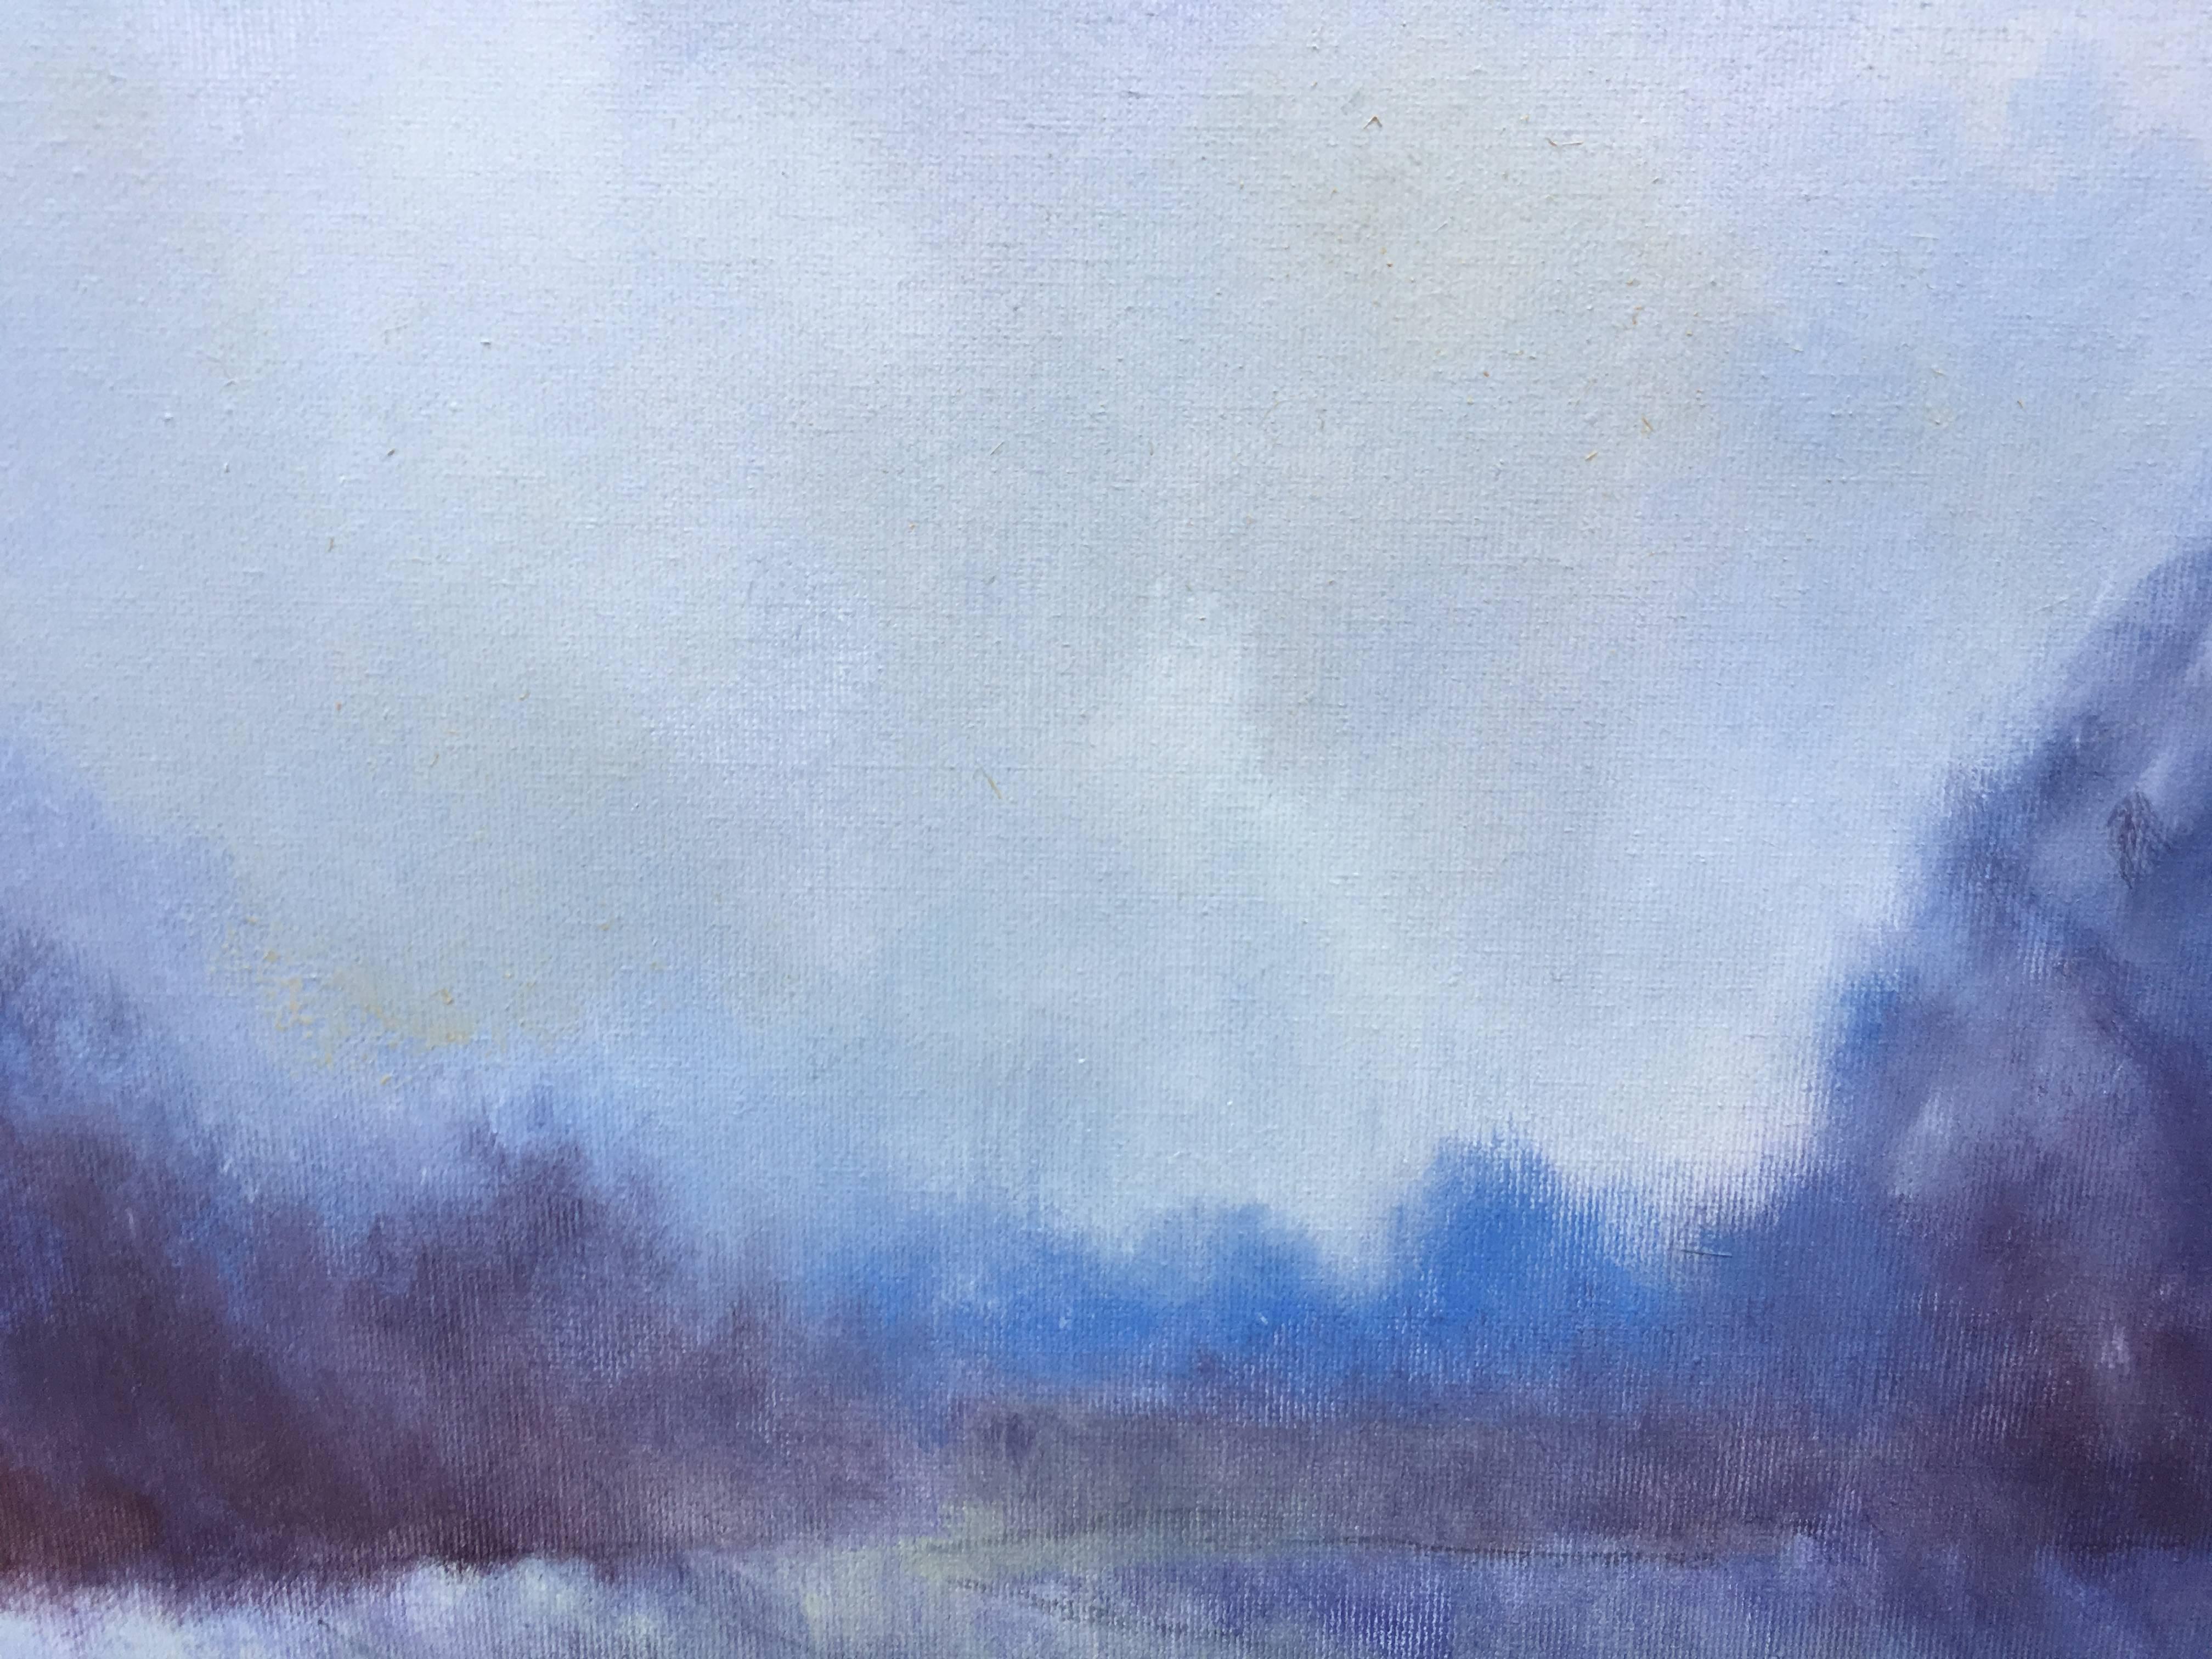 Cloudy morning - Blue Landscape Painting by Sheila Querre